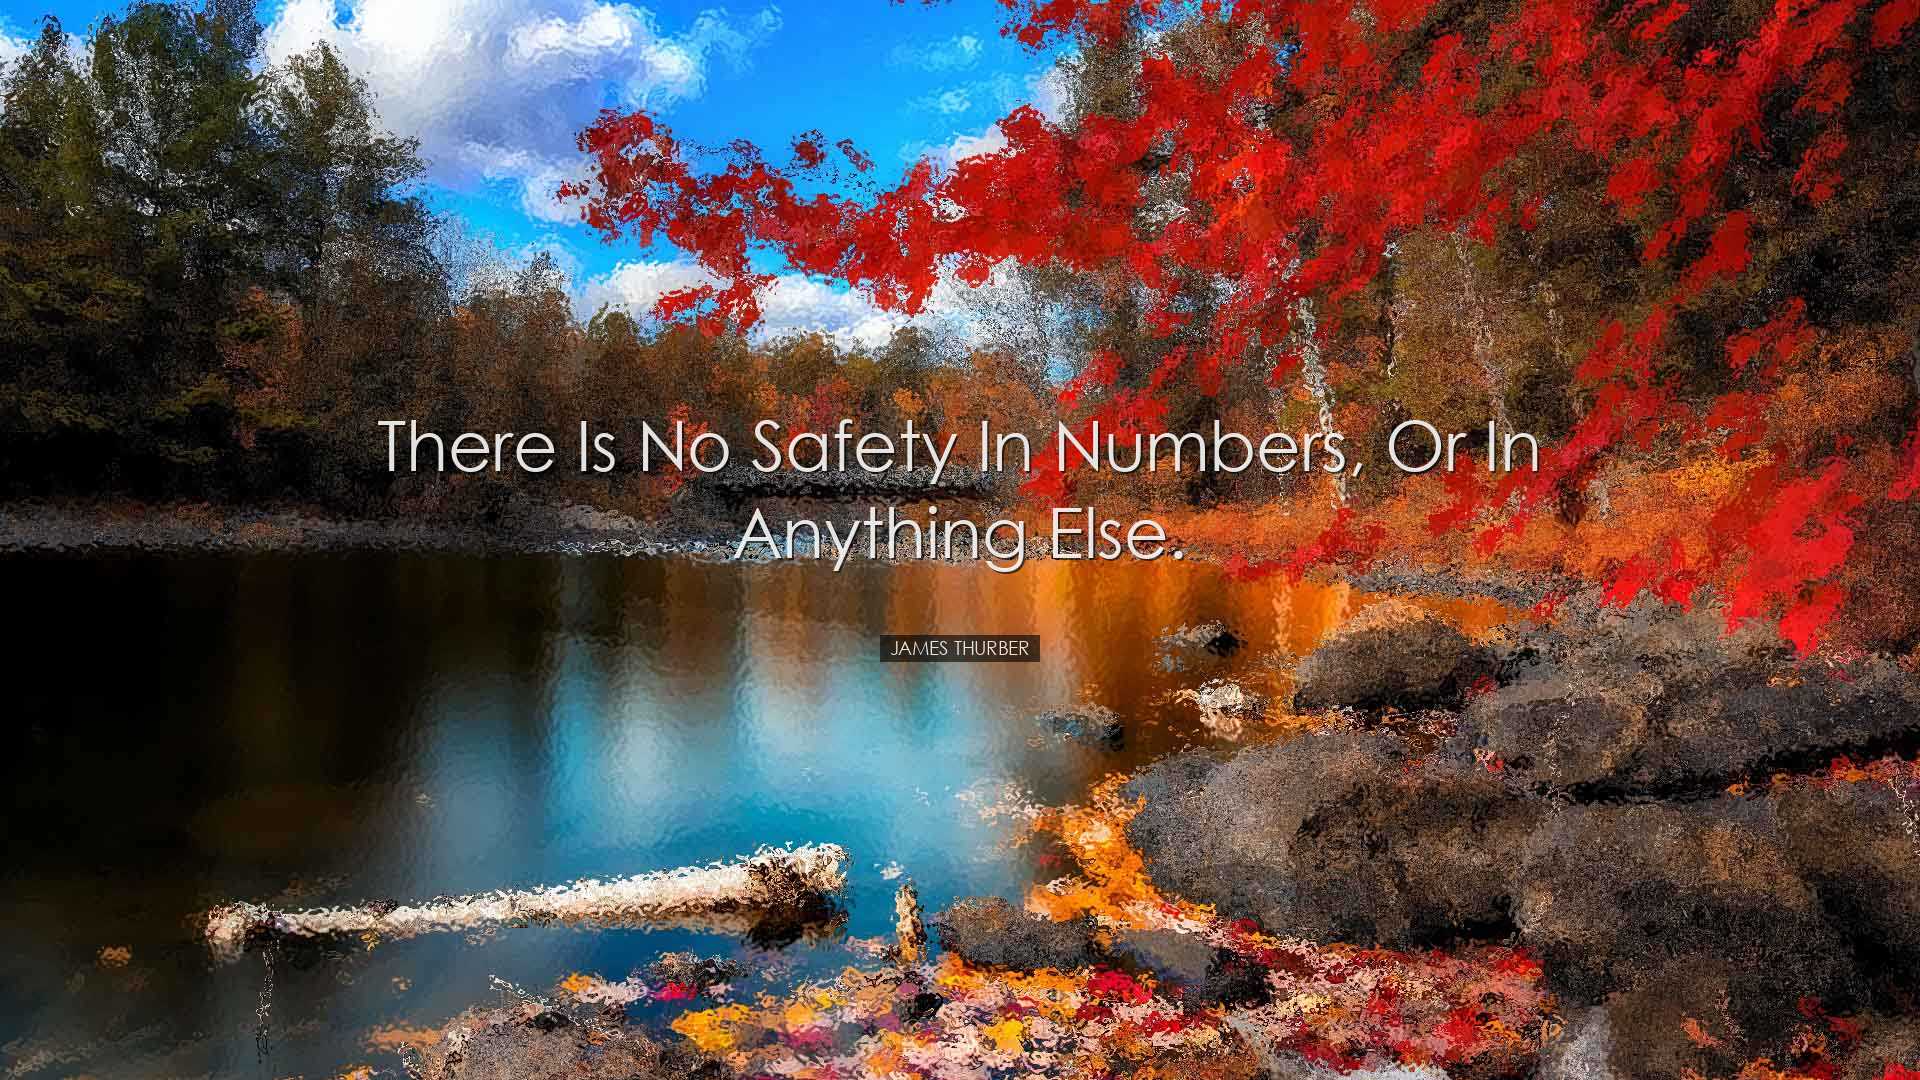 There is no safety in numbers, or in anything else. - James Thurbe